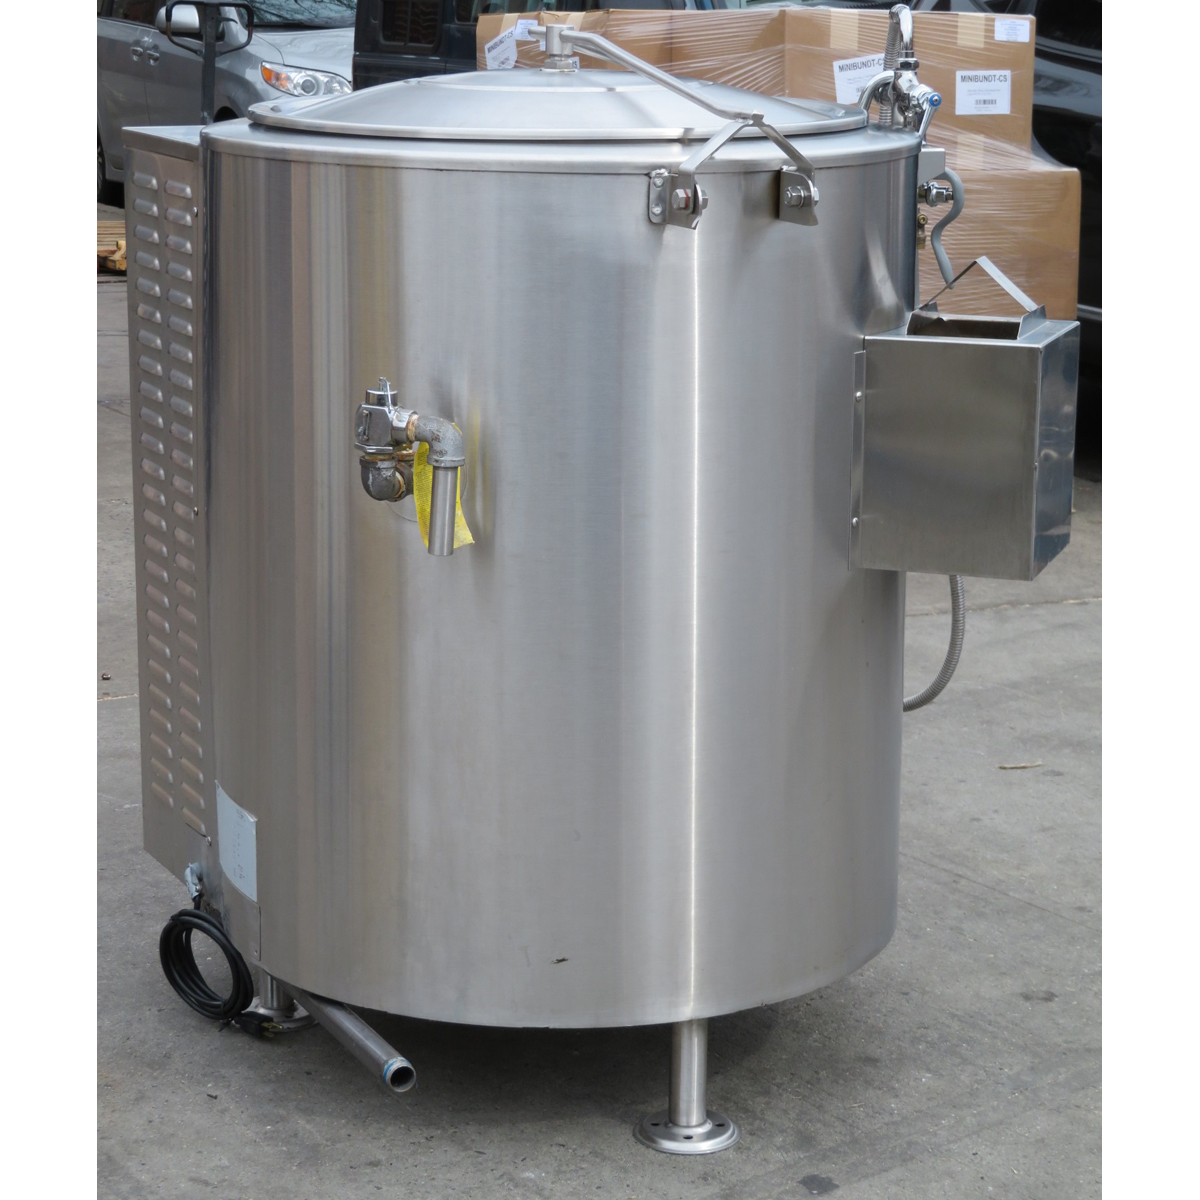 Southbend 40 Gal Stationary Steam Kettle KSLG-40E, Used Great Condition image 5